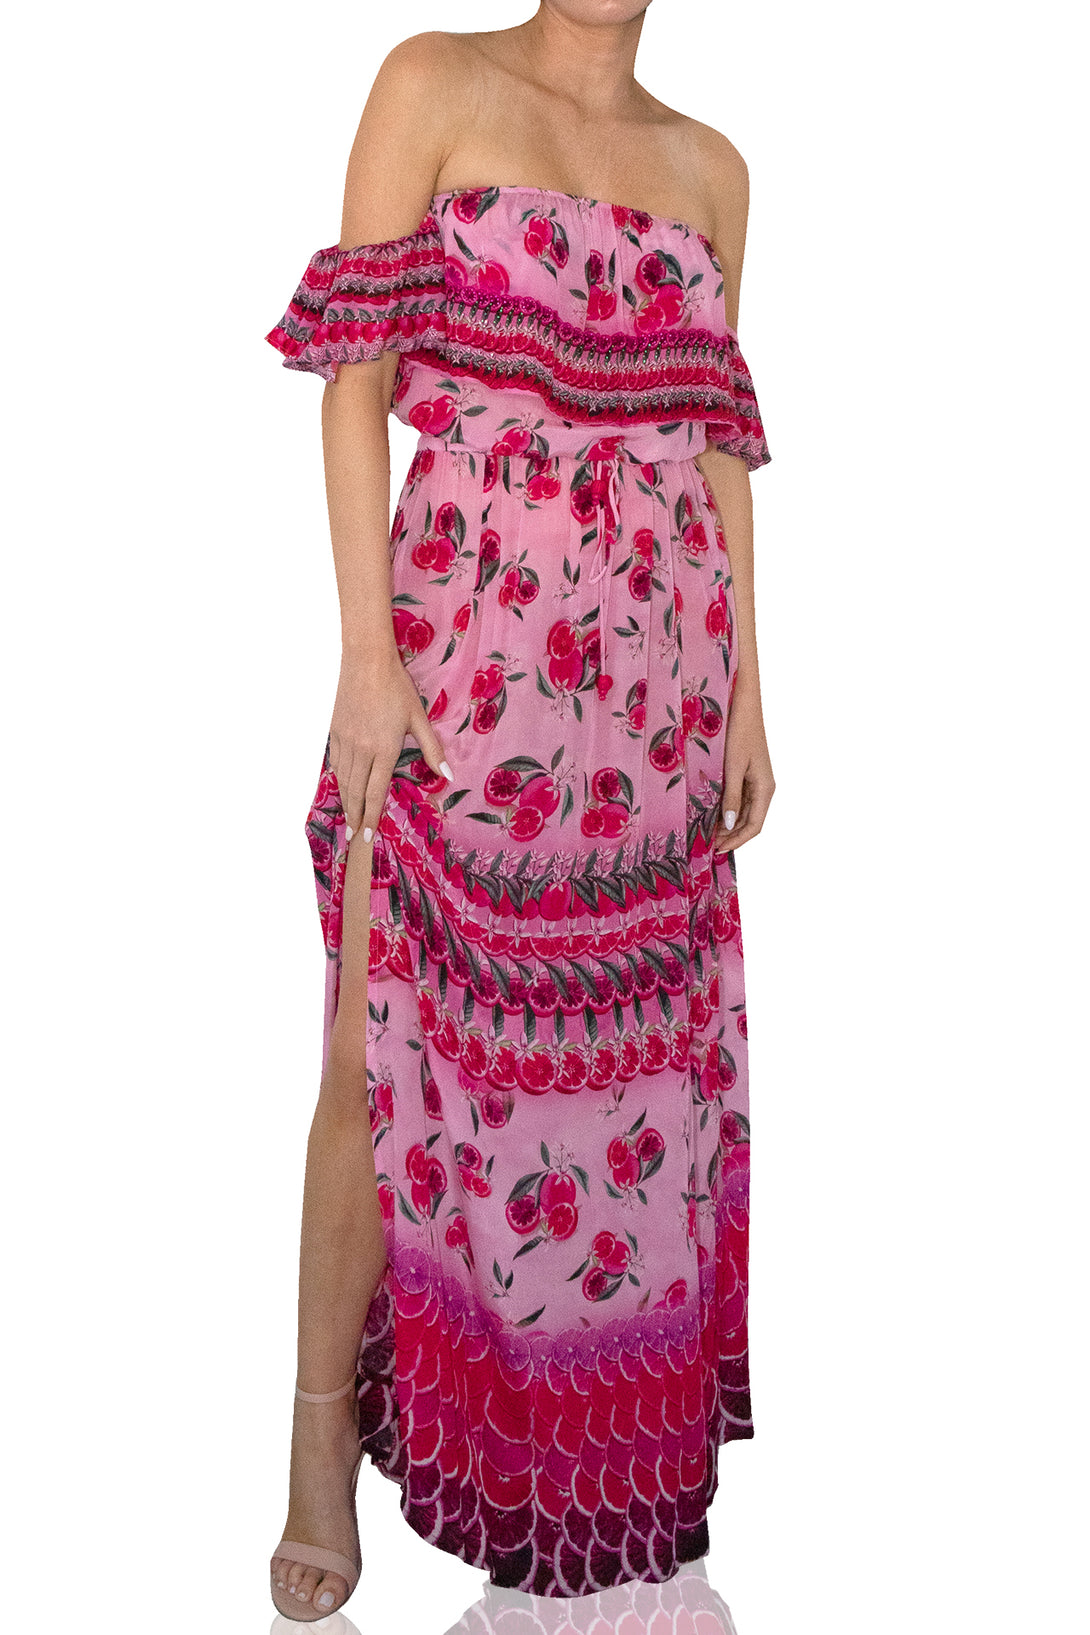  hot pink dresses for women, Shahida Parides, off the shoulder dress with sleeves, long formal dresses,